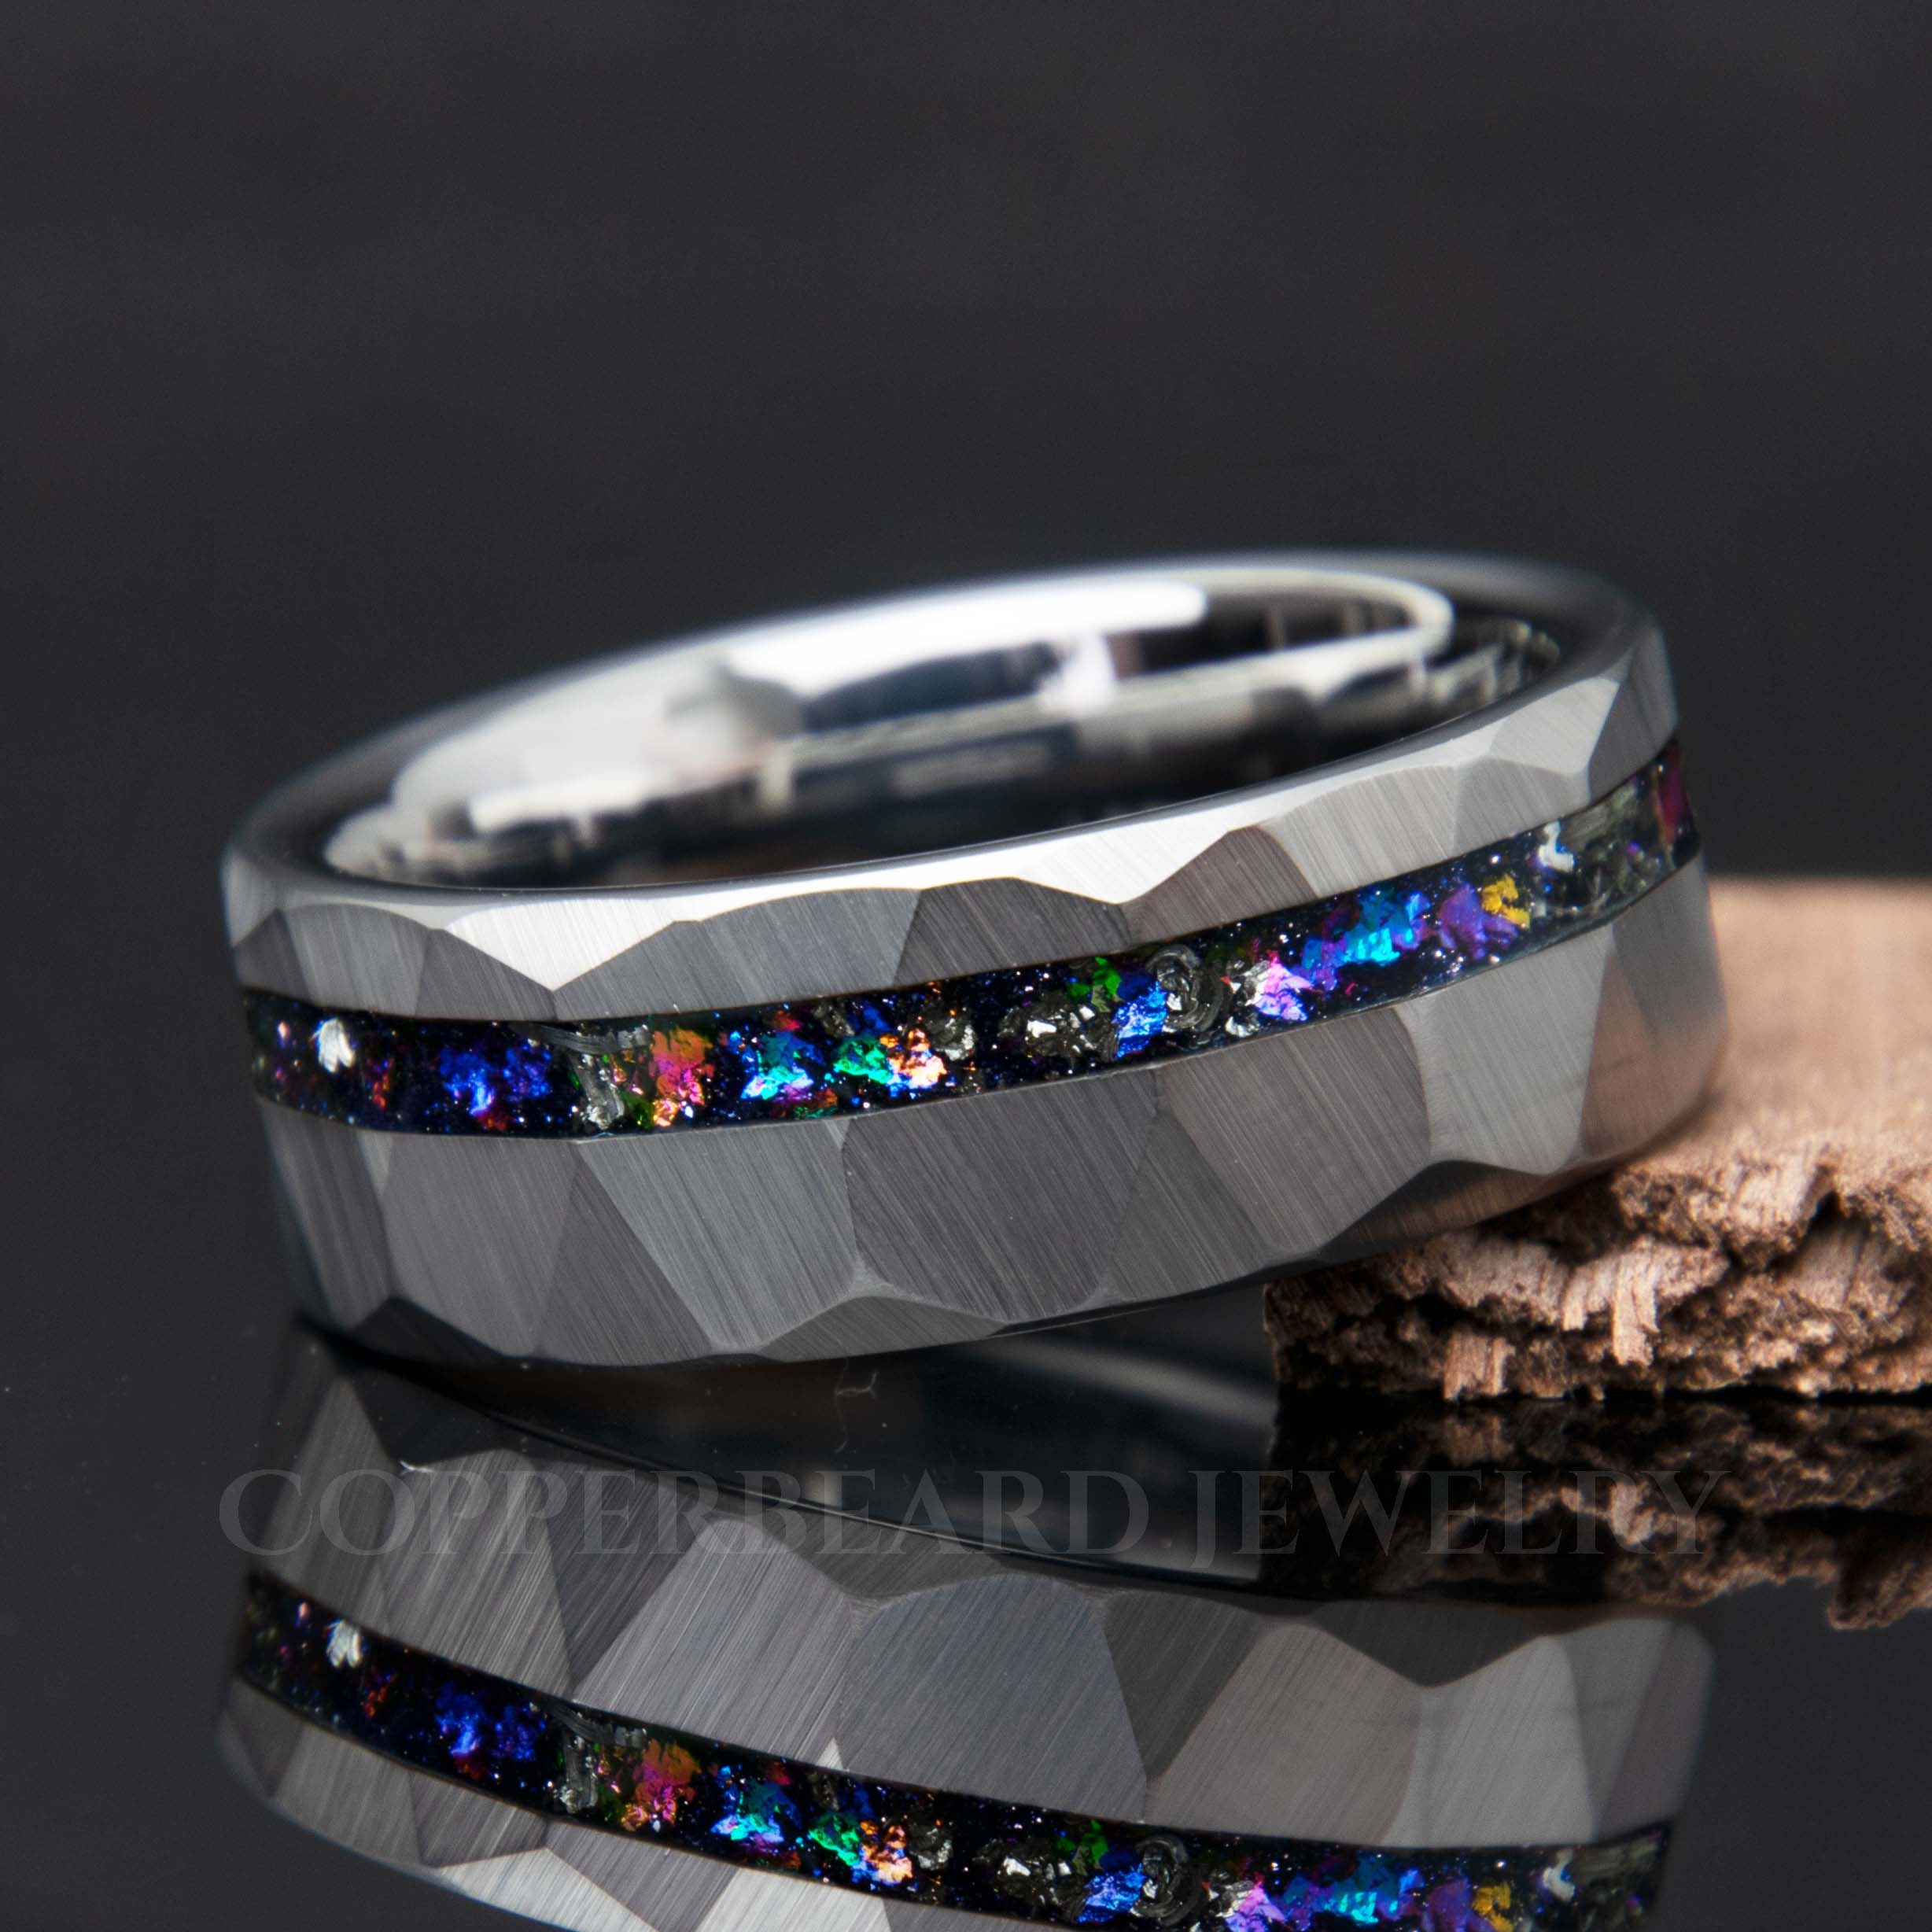 Galaxy Cosmic Flare Hammered Faceted Offset Tungsten Ring - Men's Wedding Engagement Ring - Copperbeard Jewelry